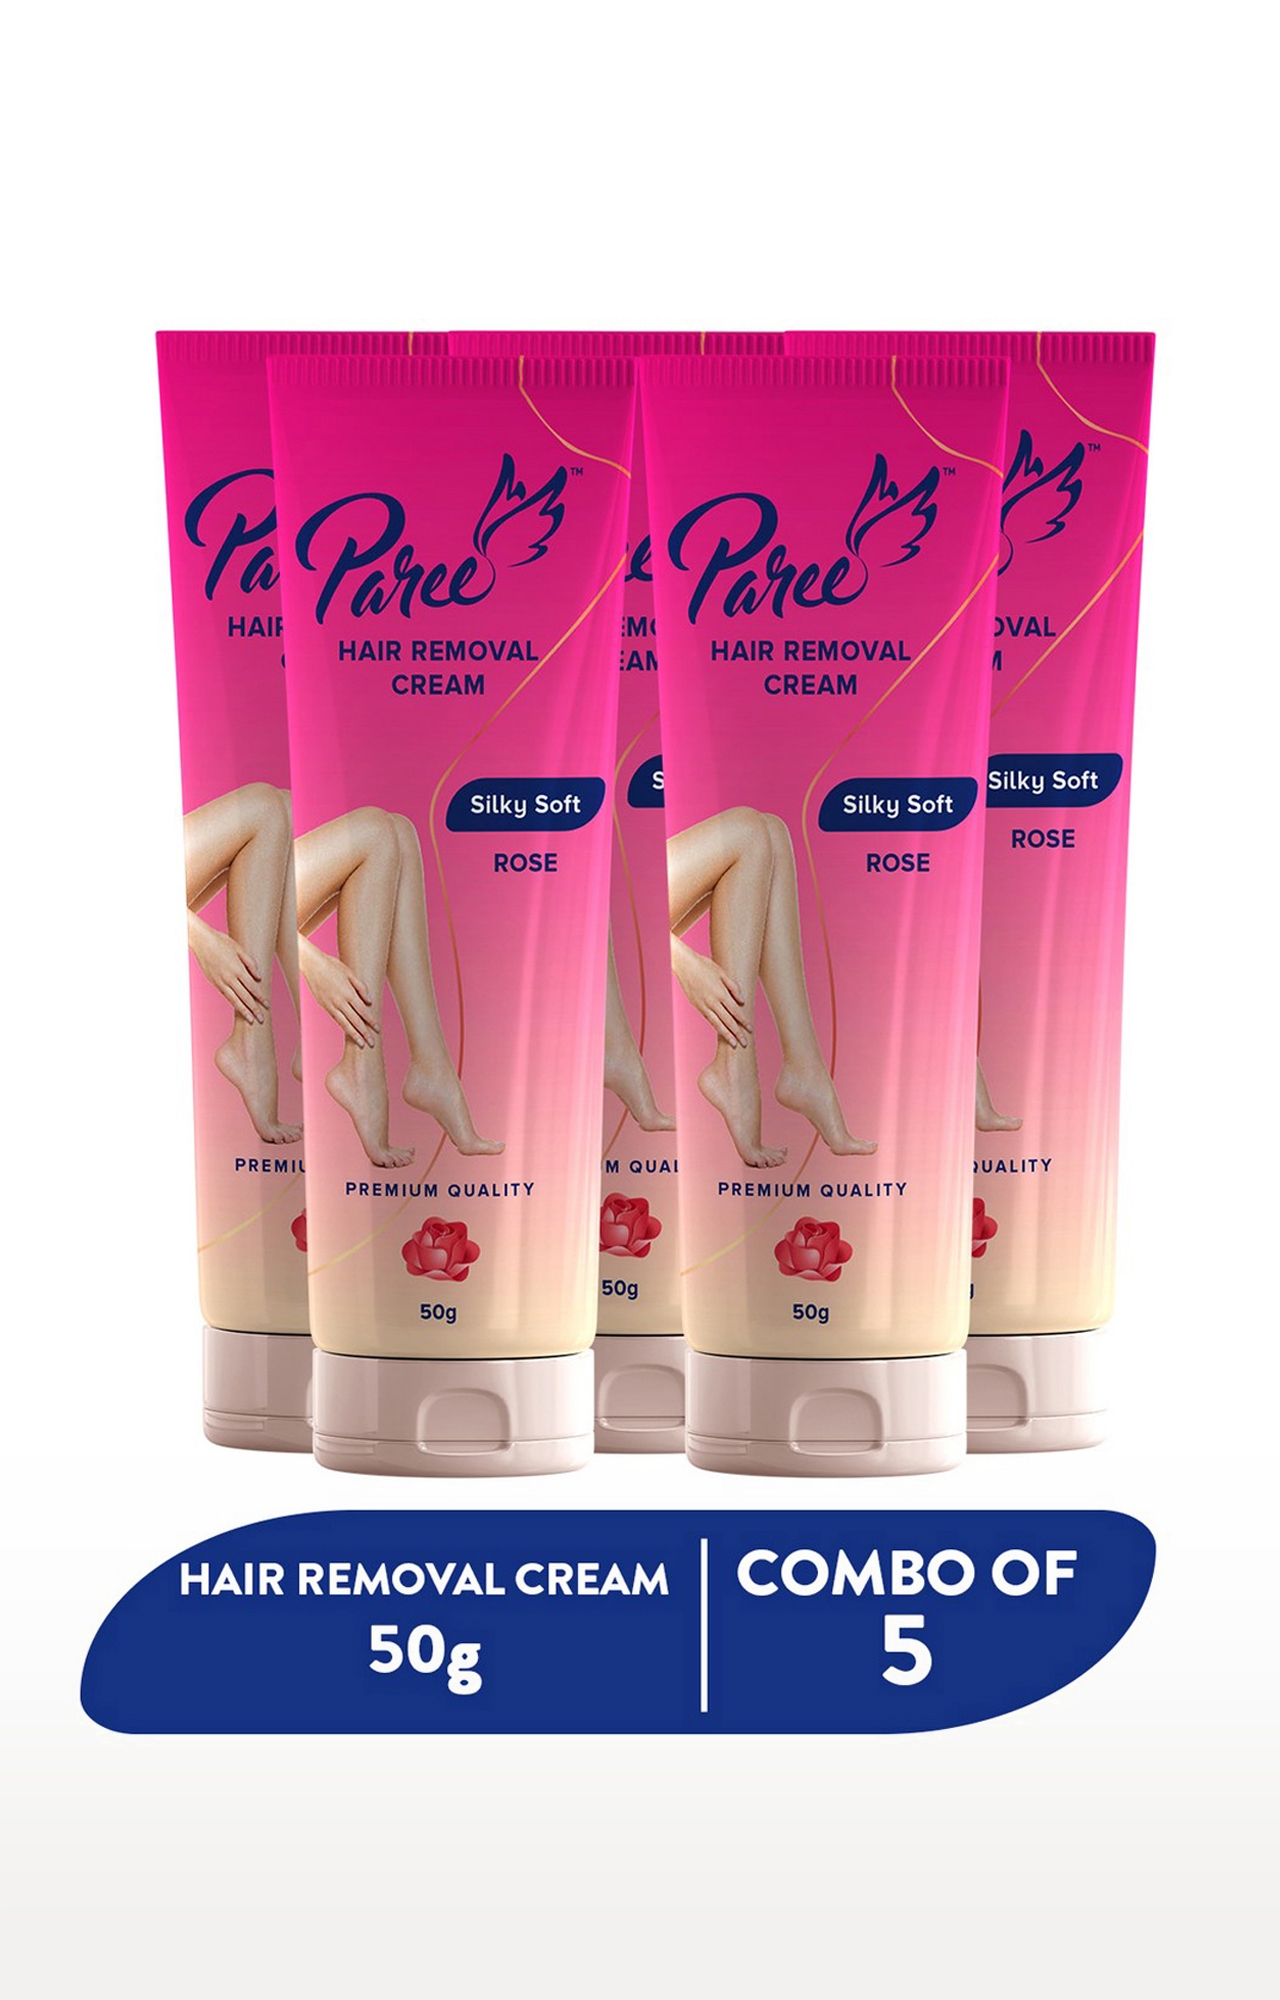 Paree | Paree Hair Removal Cream Silky Soft With Rose (50g) | For Sensitive Skin - Pack of 5